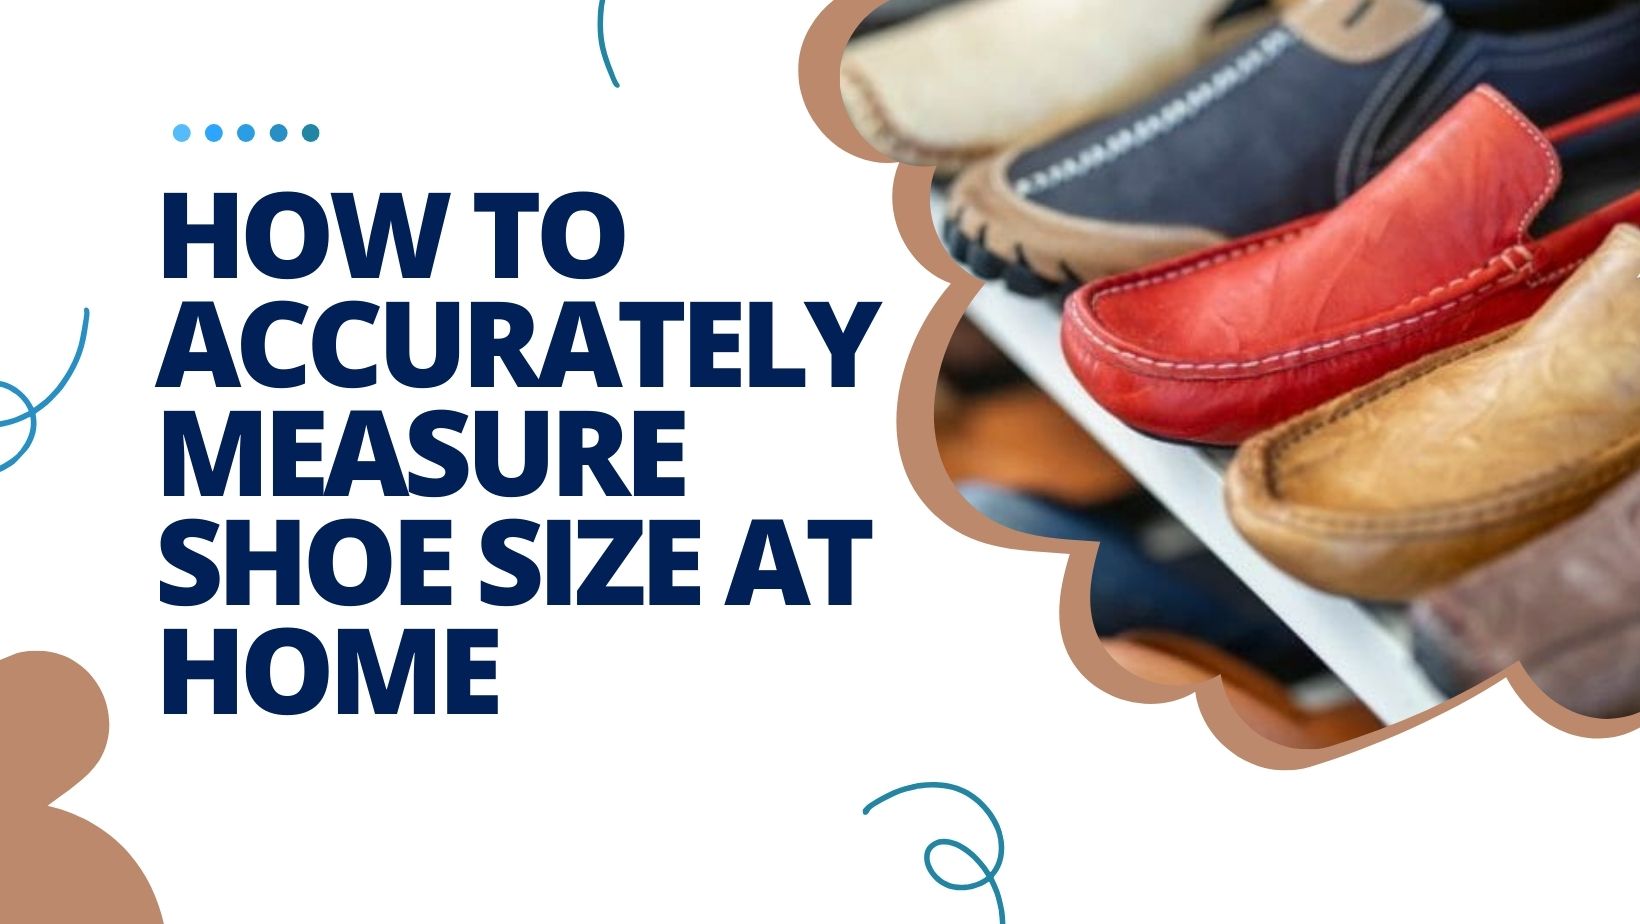 How to Accurately Measure Shoe Size at Home